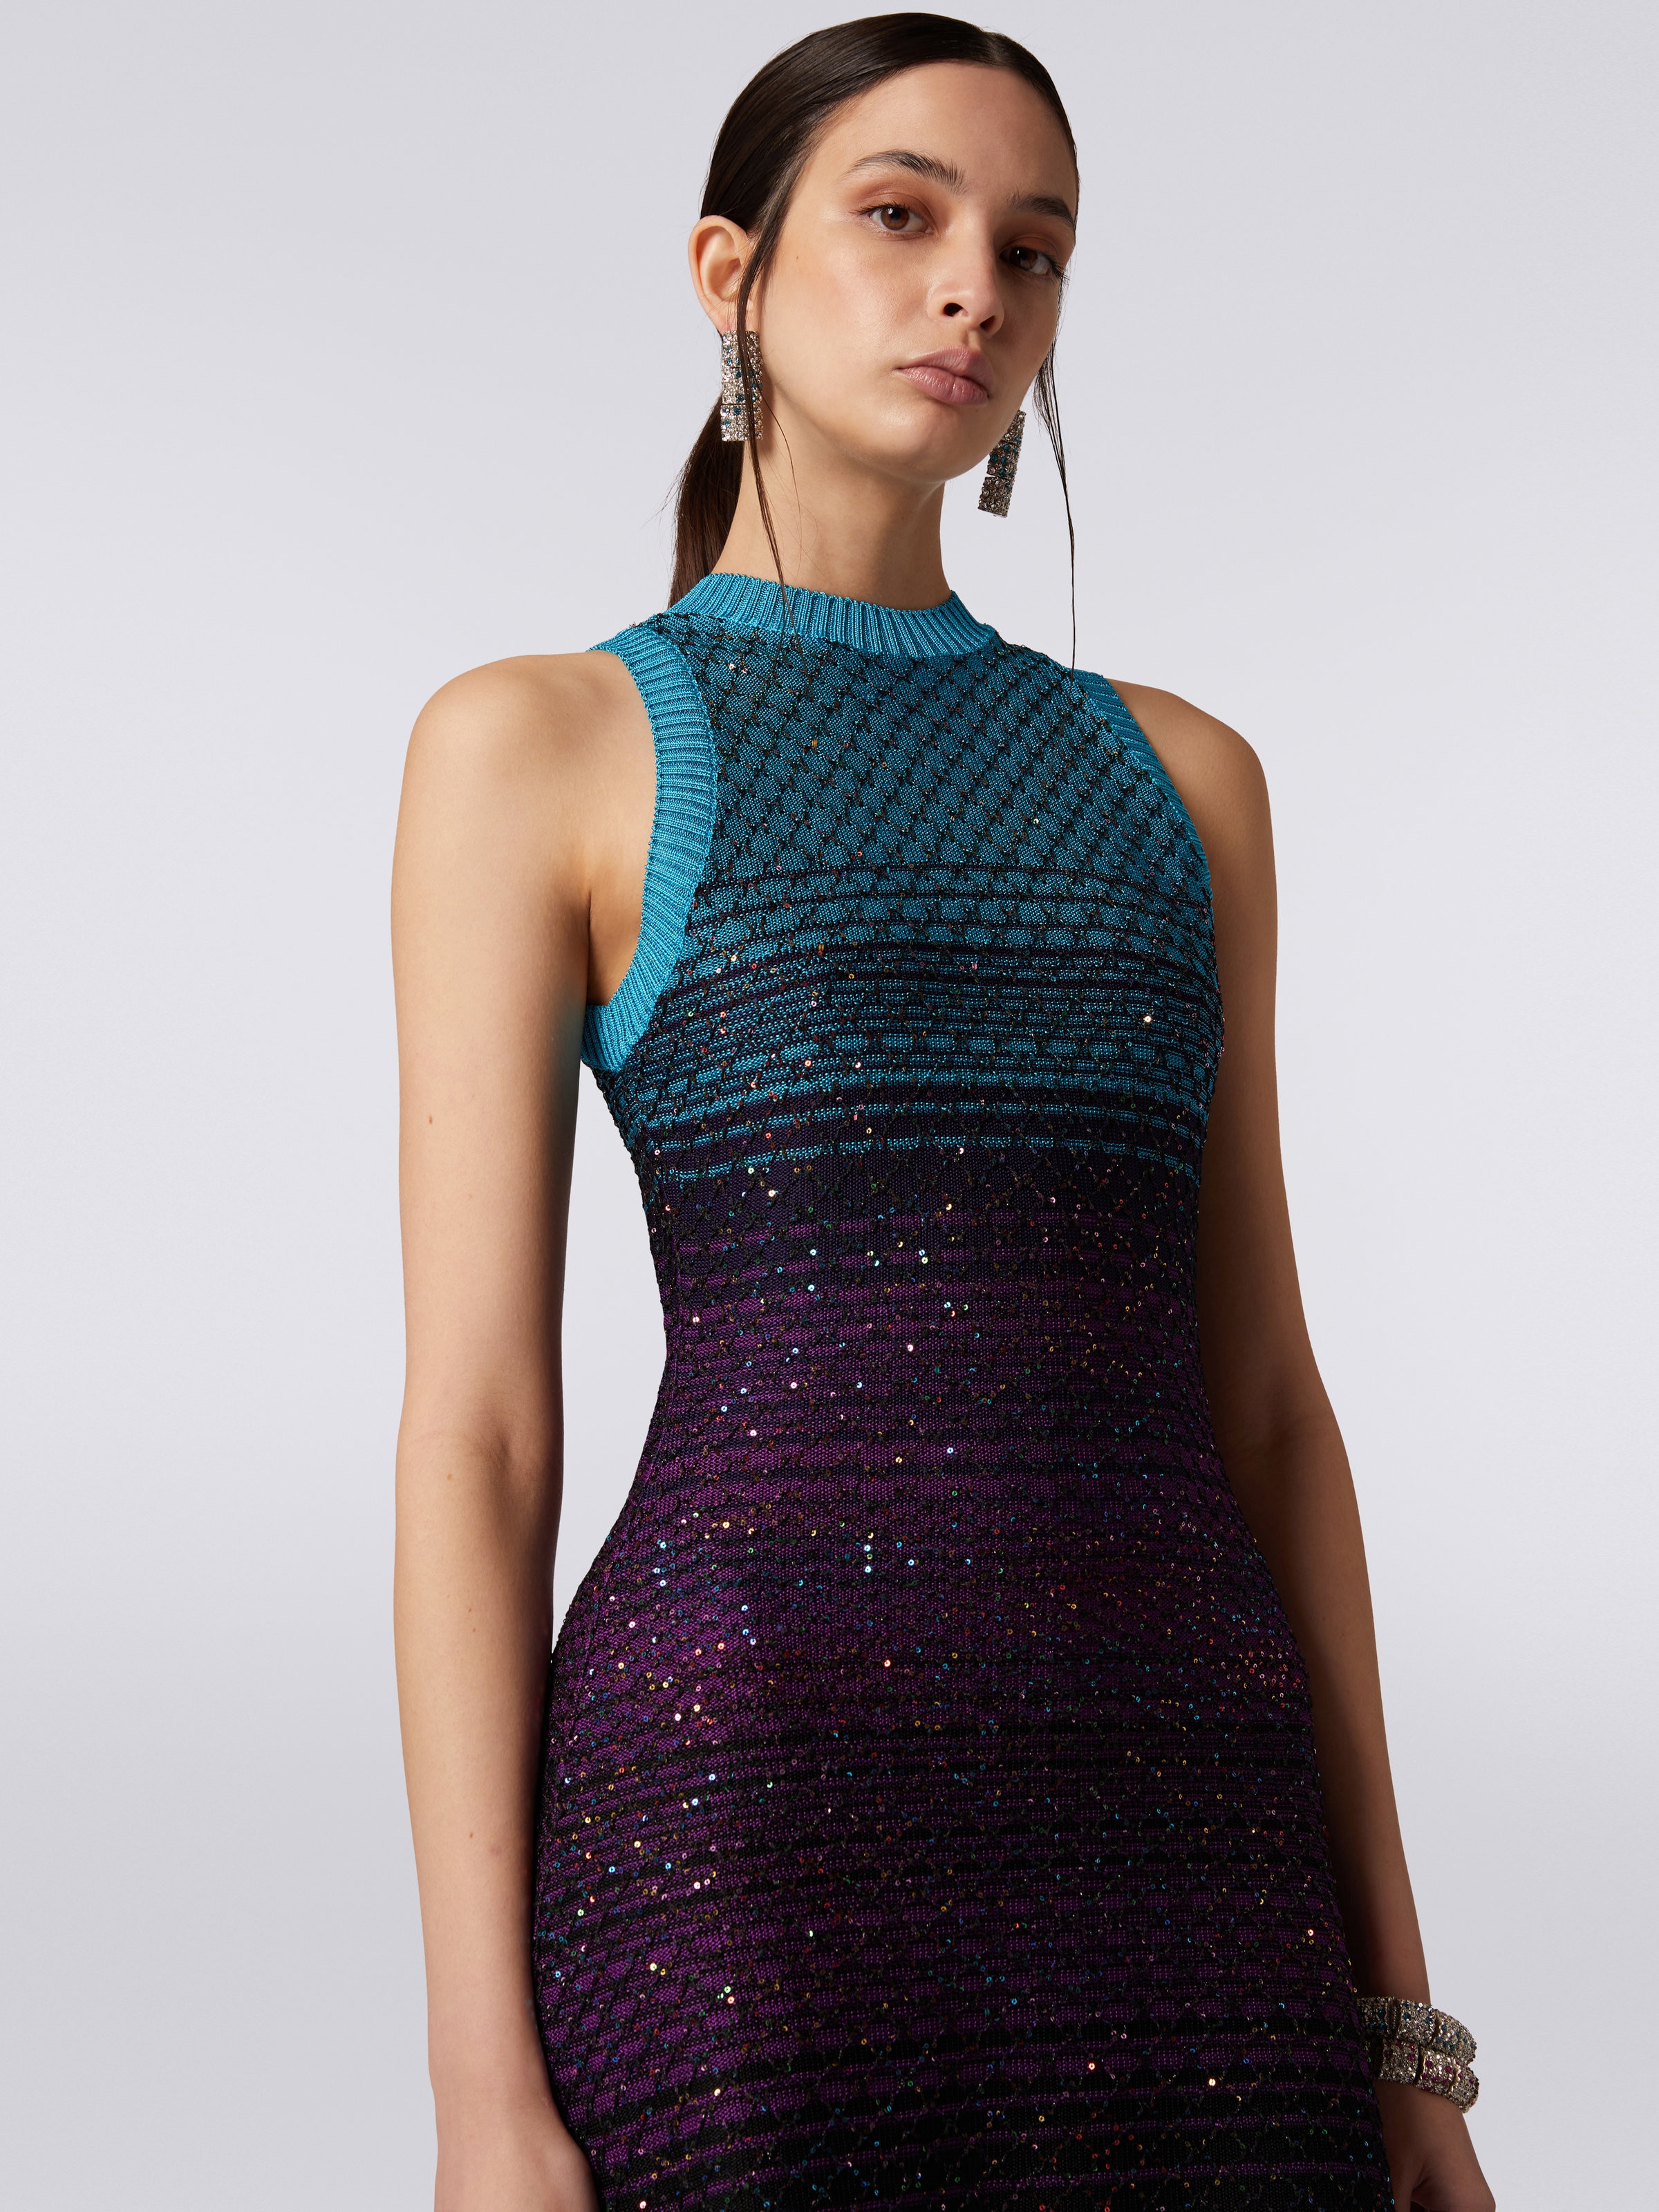 Sleeveless mesh dress with sequins, Turquoise, Purple & Black - 4